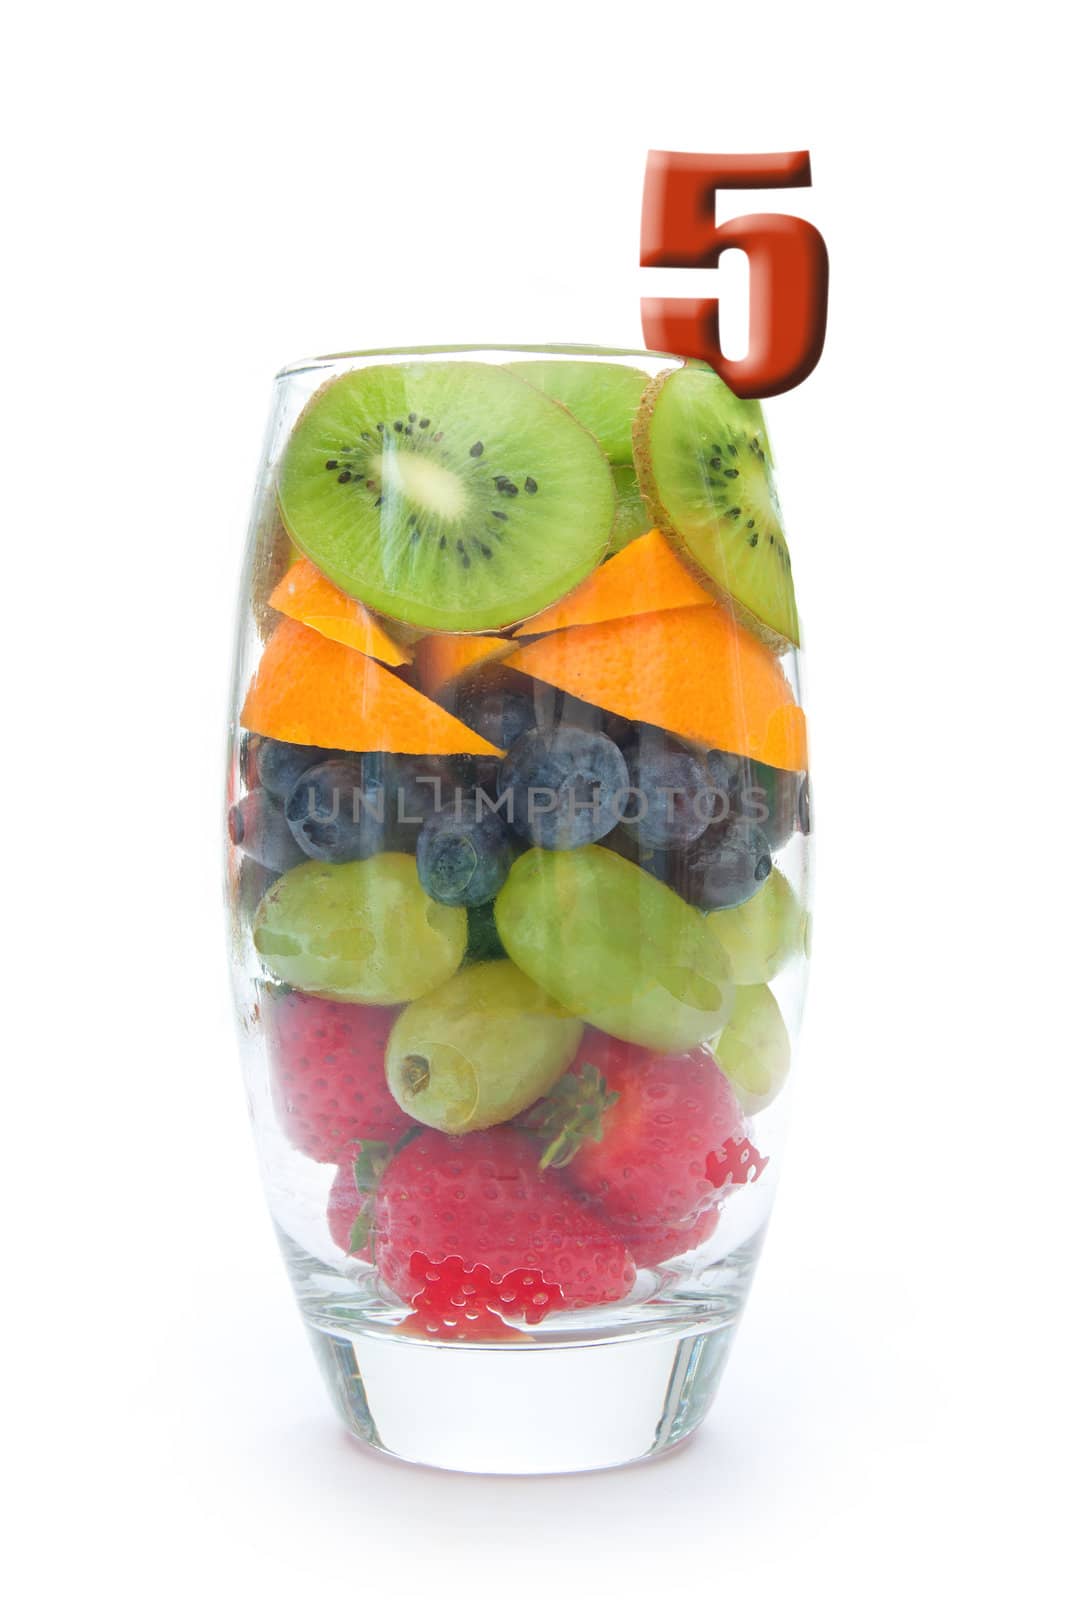 Five fruits packed into a glass including kiwi, berries and orange 